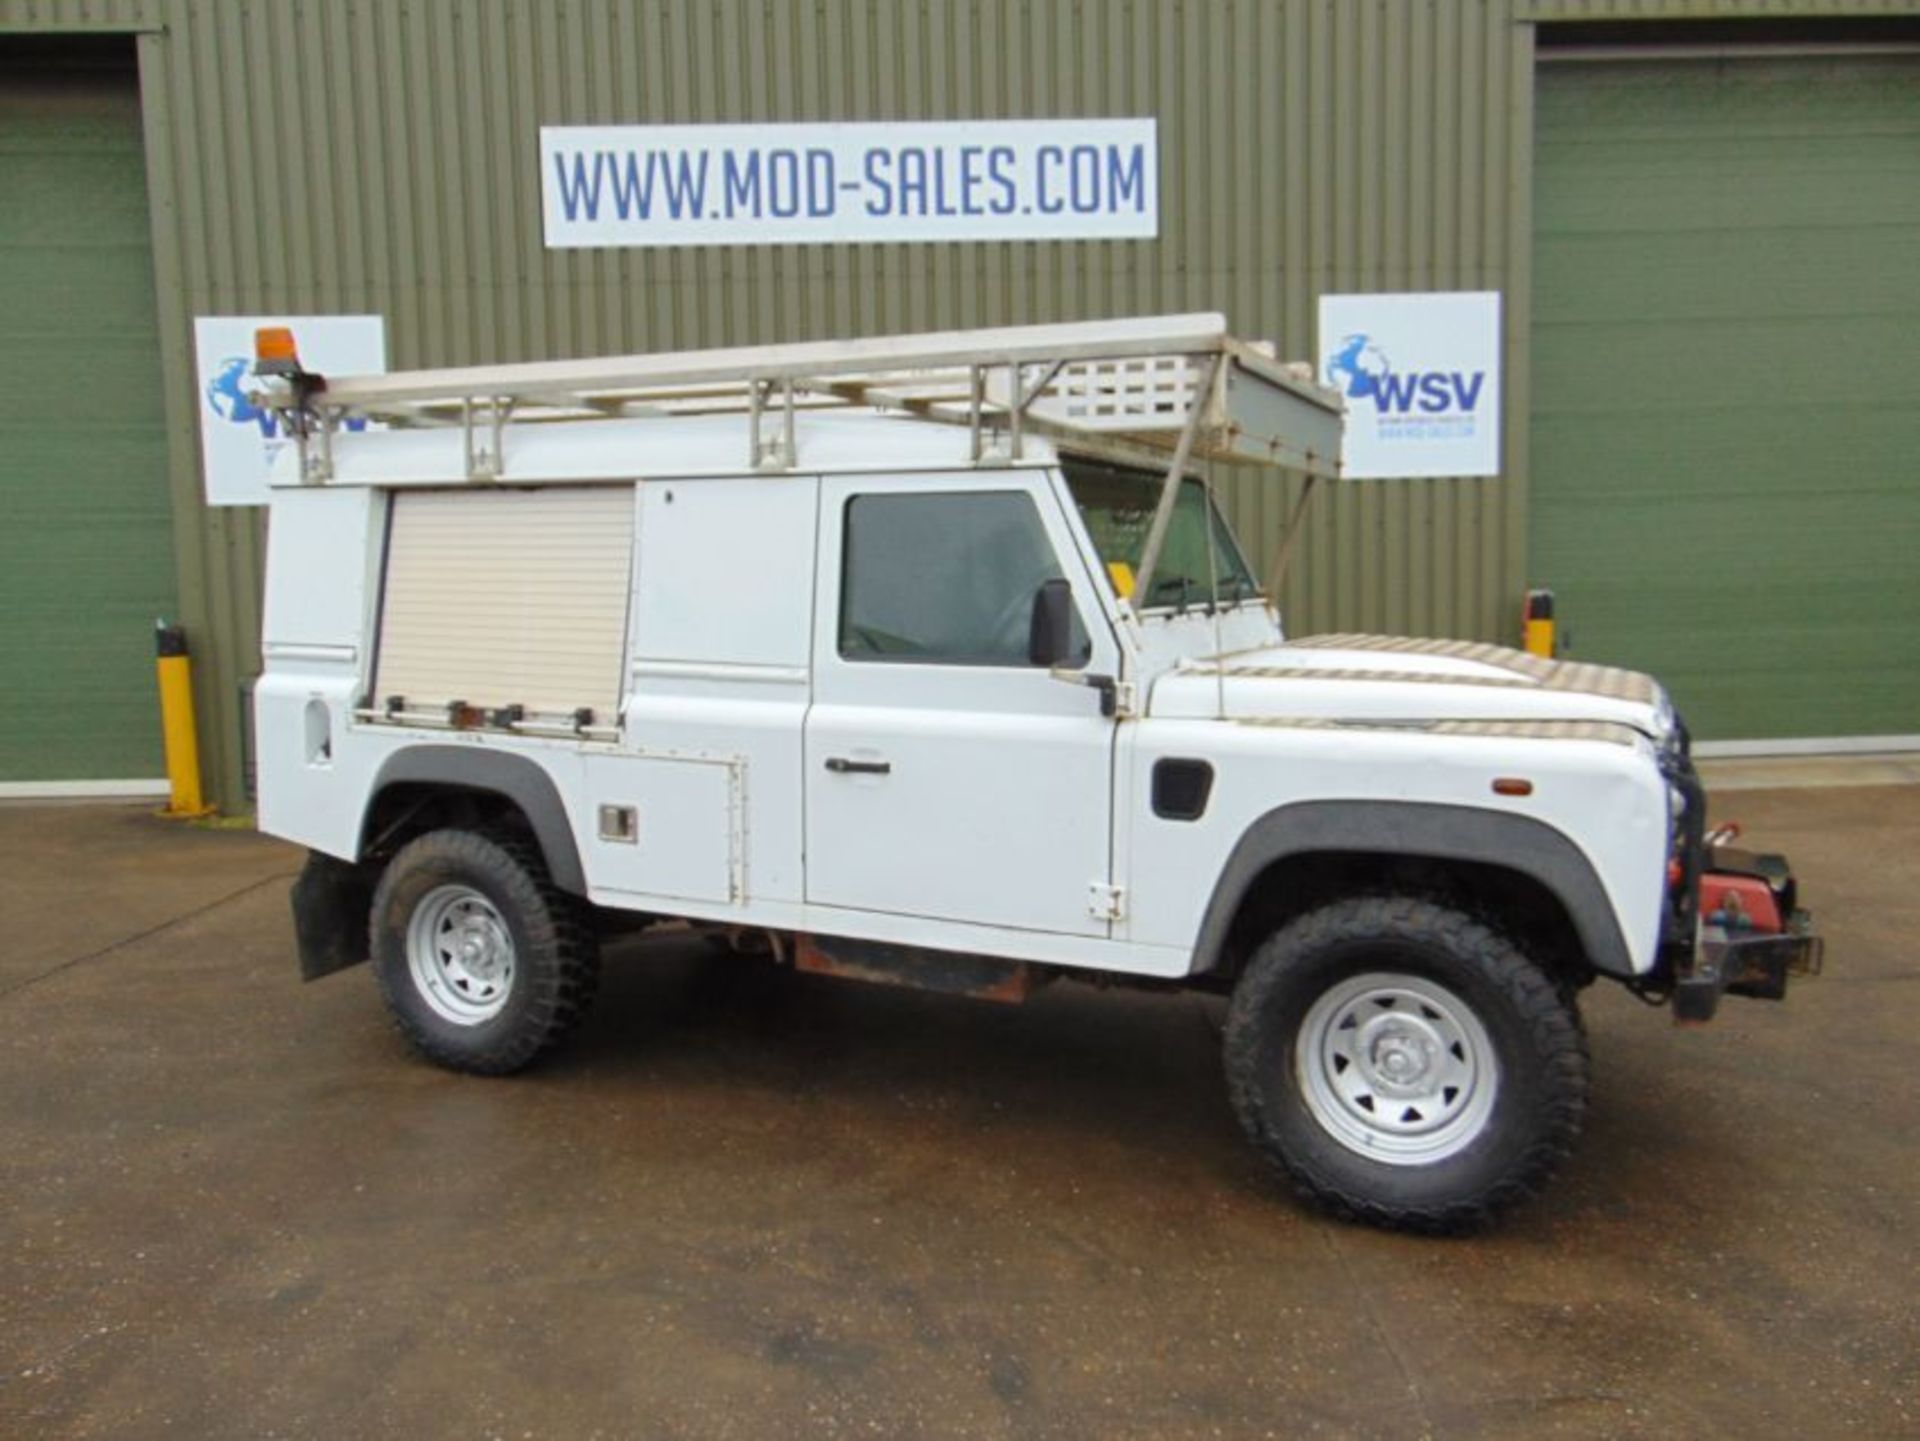 2011 Land Rover Defender 110 Puma hardtop 4x4 mobile workshop with Winch Etc. From UK Utility Co. - Image 31 of 31